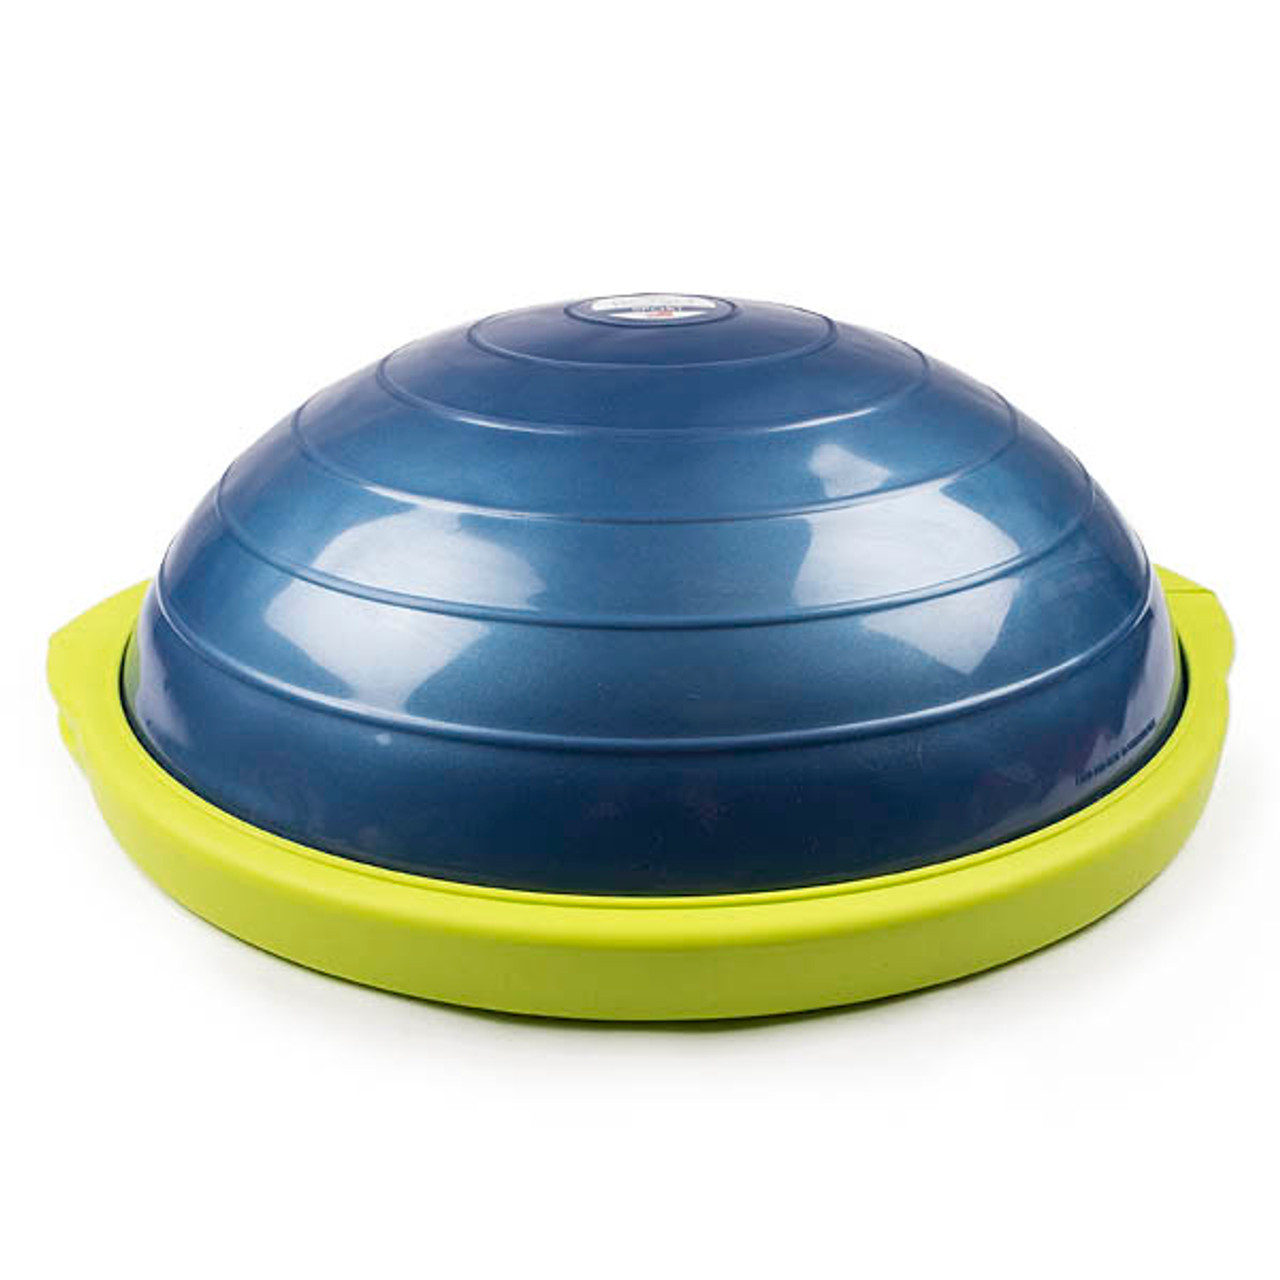 Bosu Sport positional cueing Fitness Acessories Workout positioning  help